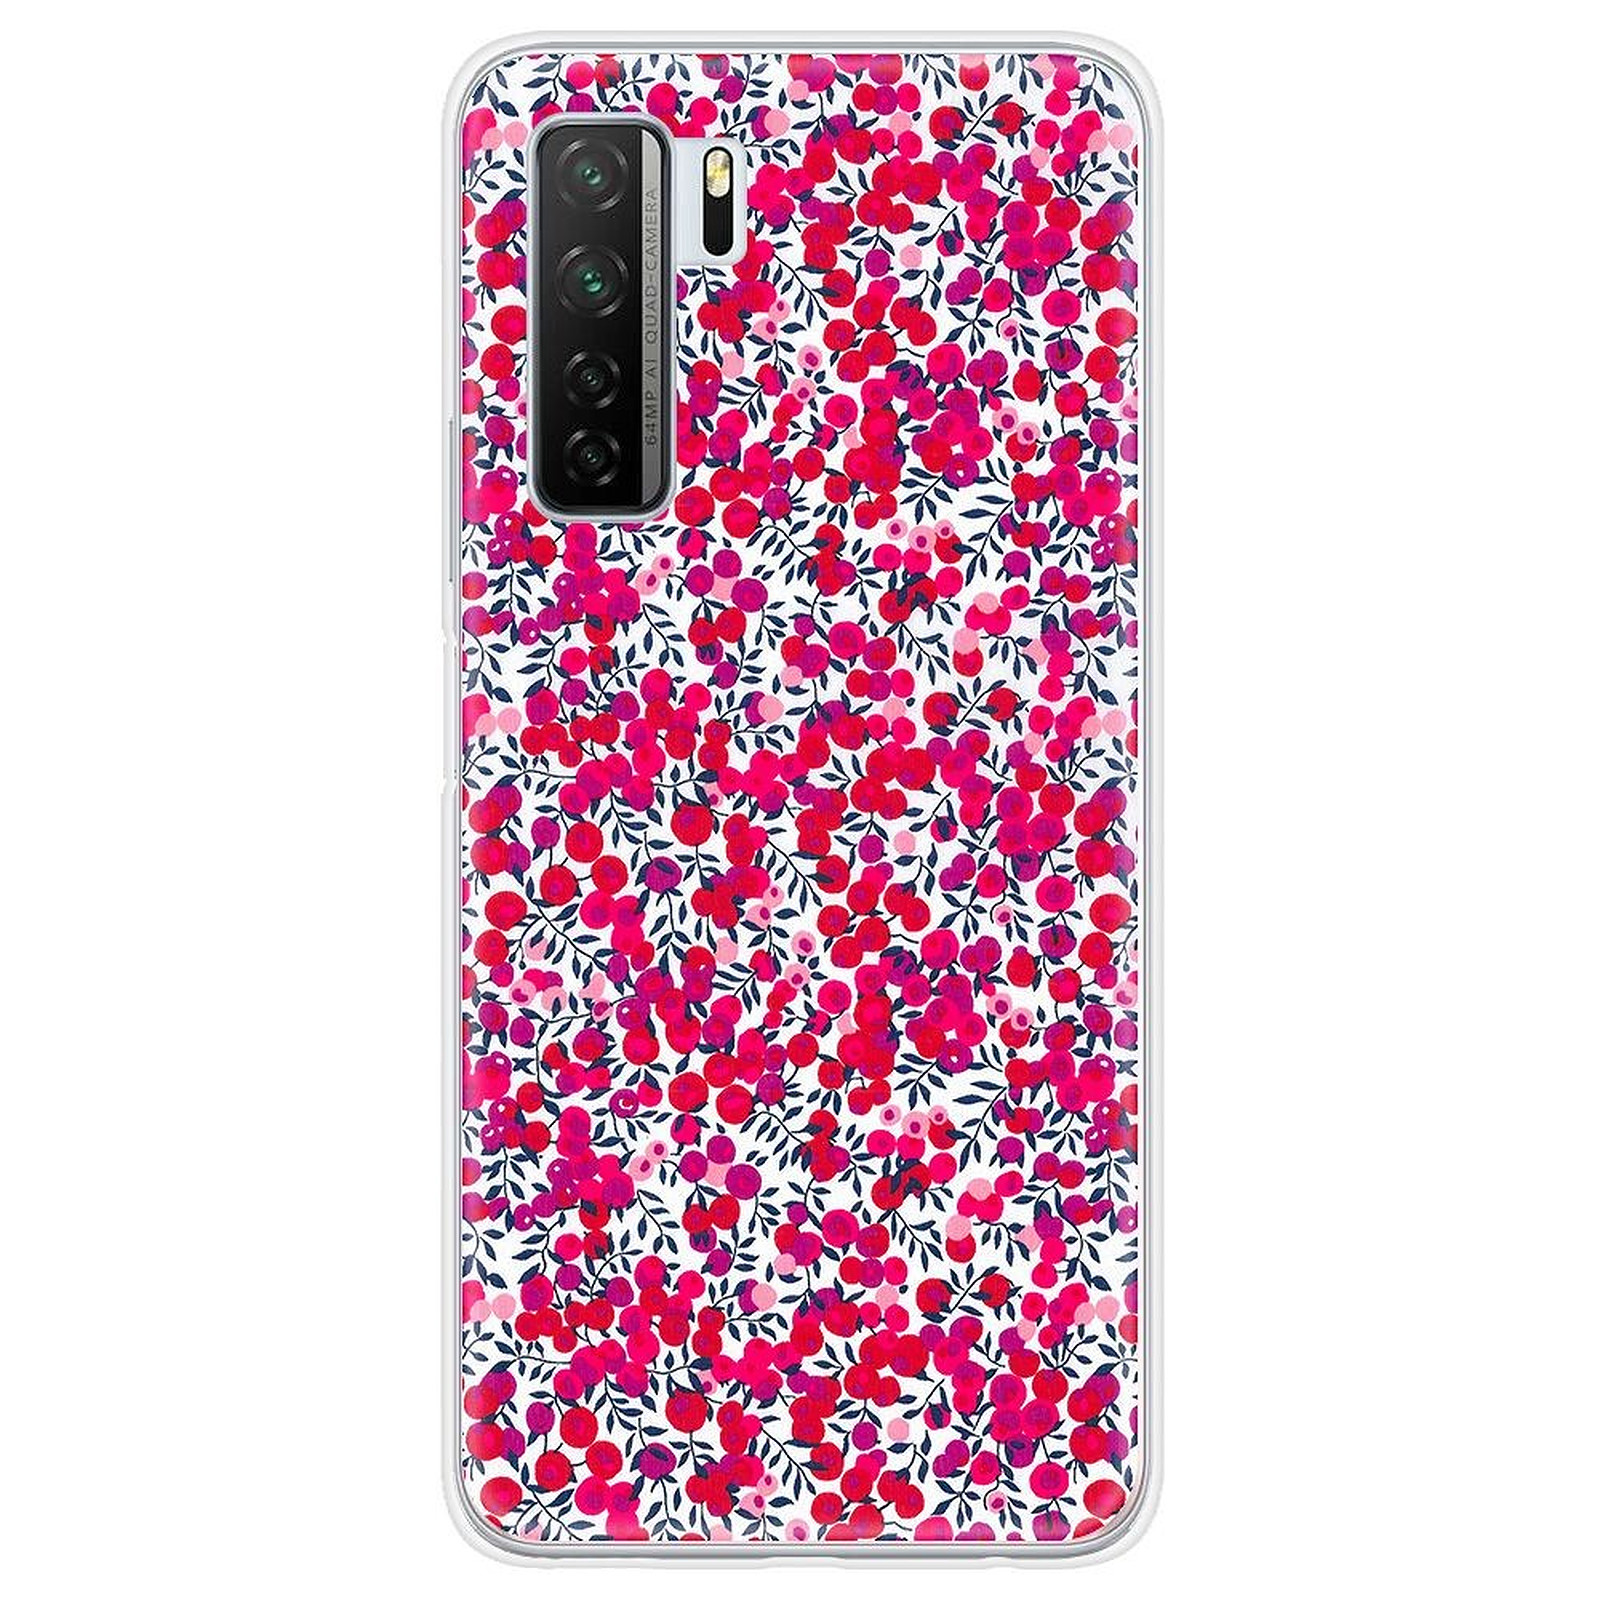 1001 Coques Coque silicone gel Huawei P40 Lite 5G motif Liberty Wiltshire Rouge - Coque telephone 1001Coques